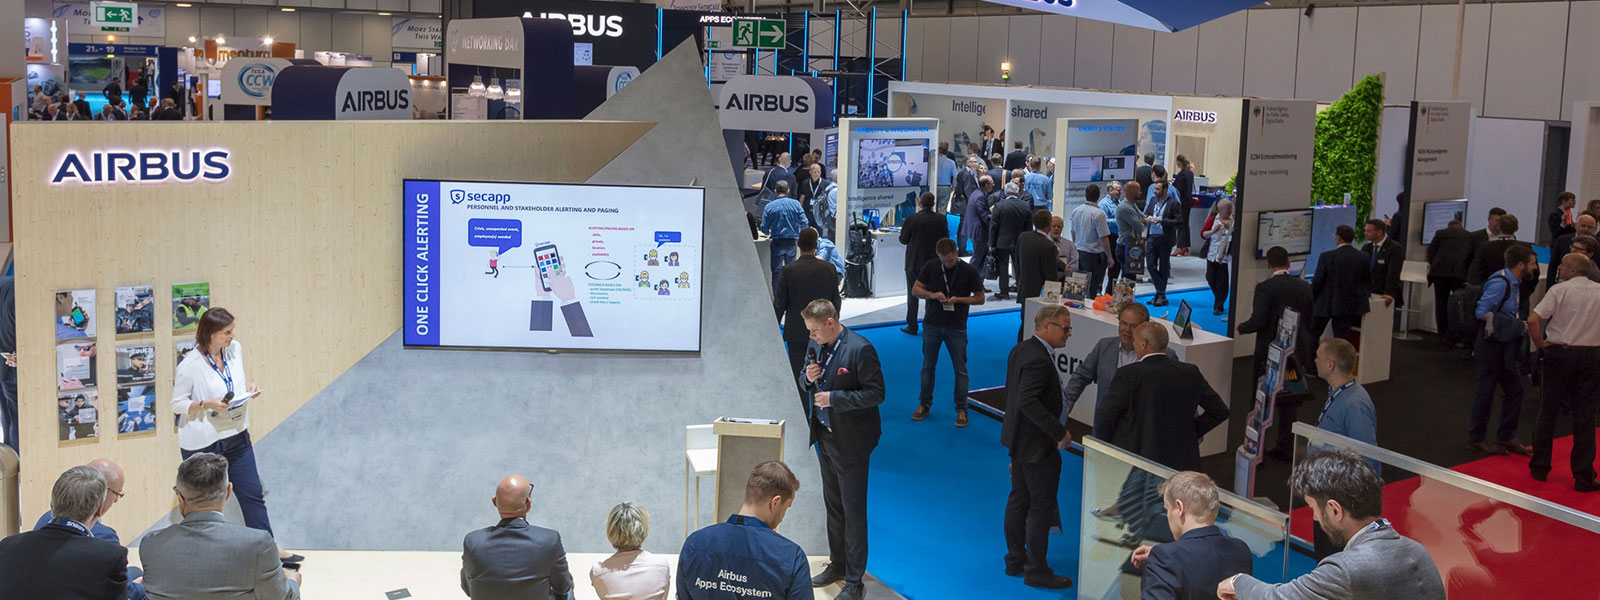 Airbus at Critical Communications World 2018